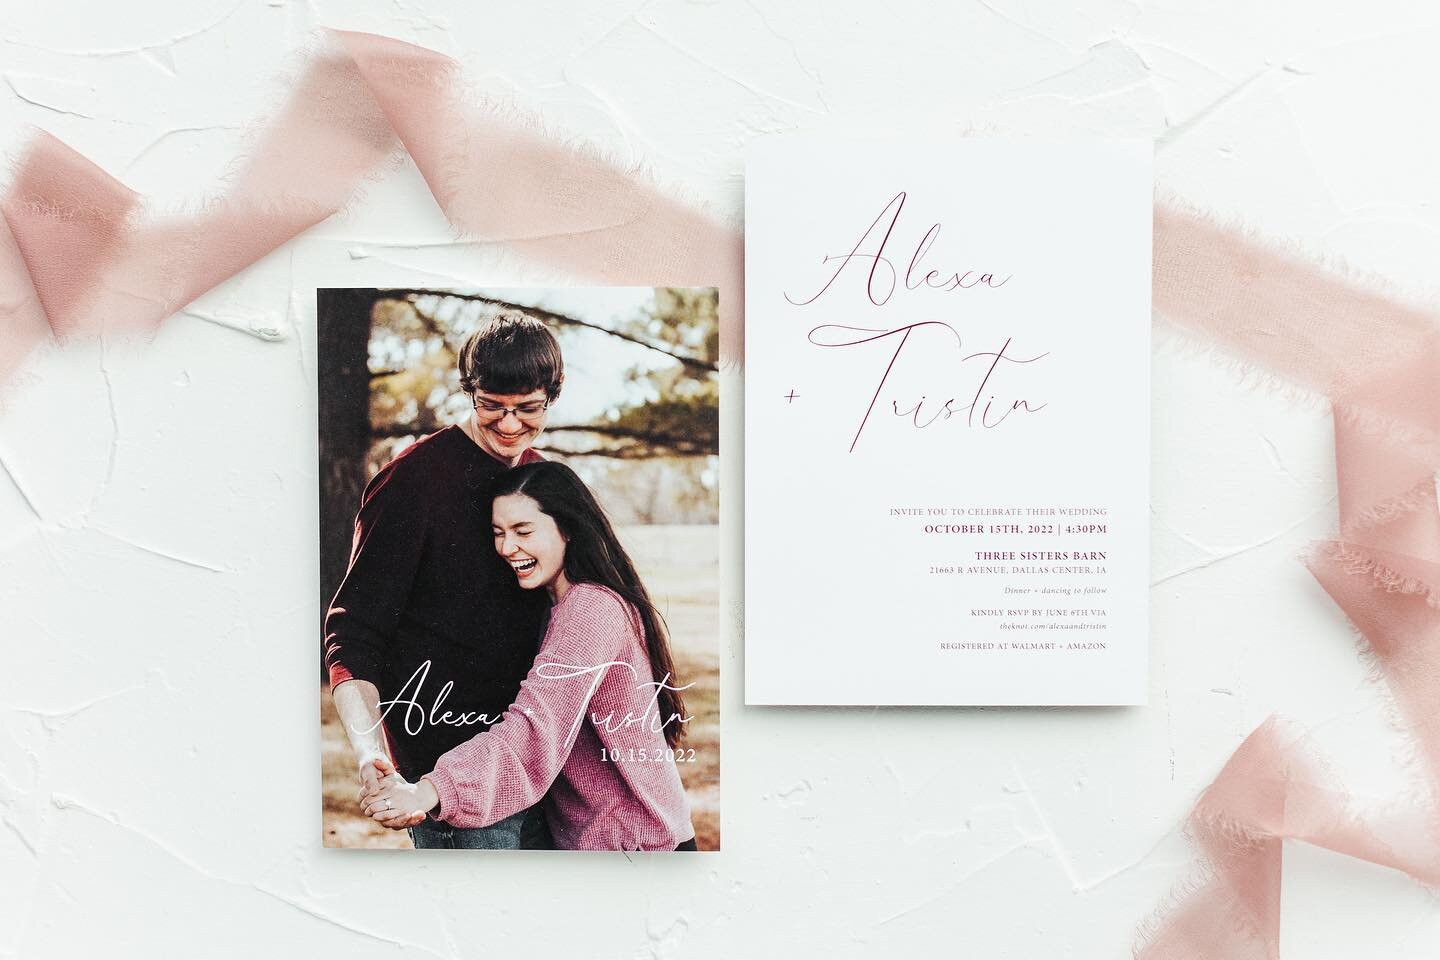 LOVE this double sided wedding invitation for Alexa + Tristan 💌